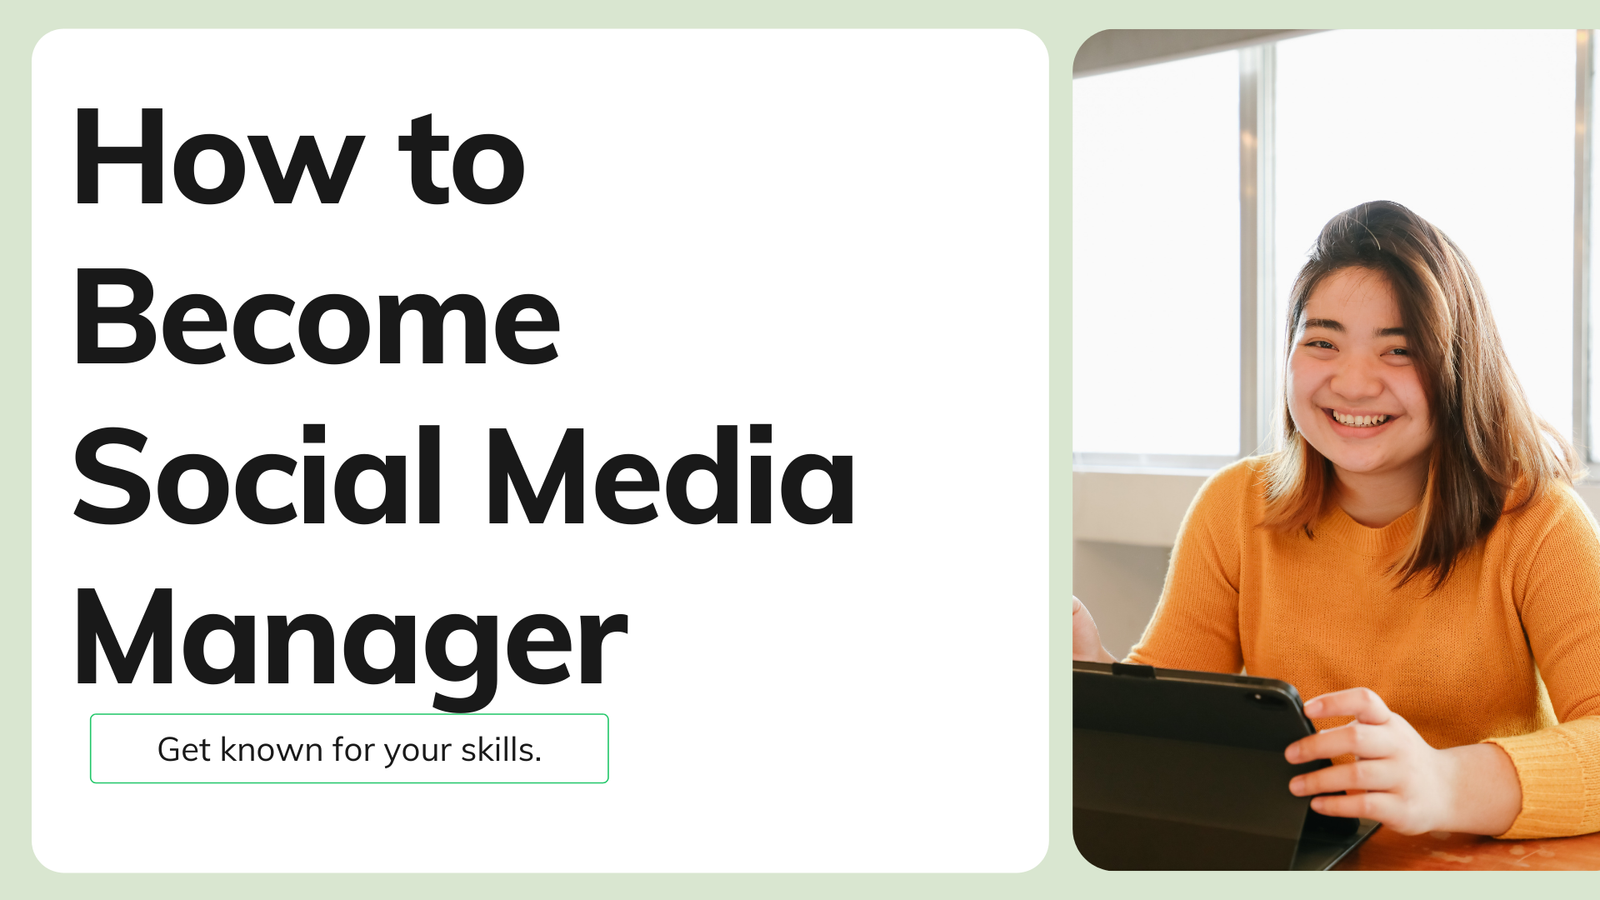 Here are 5 effective ways to become social media manager